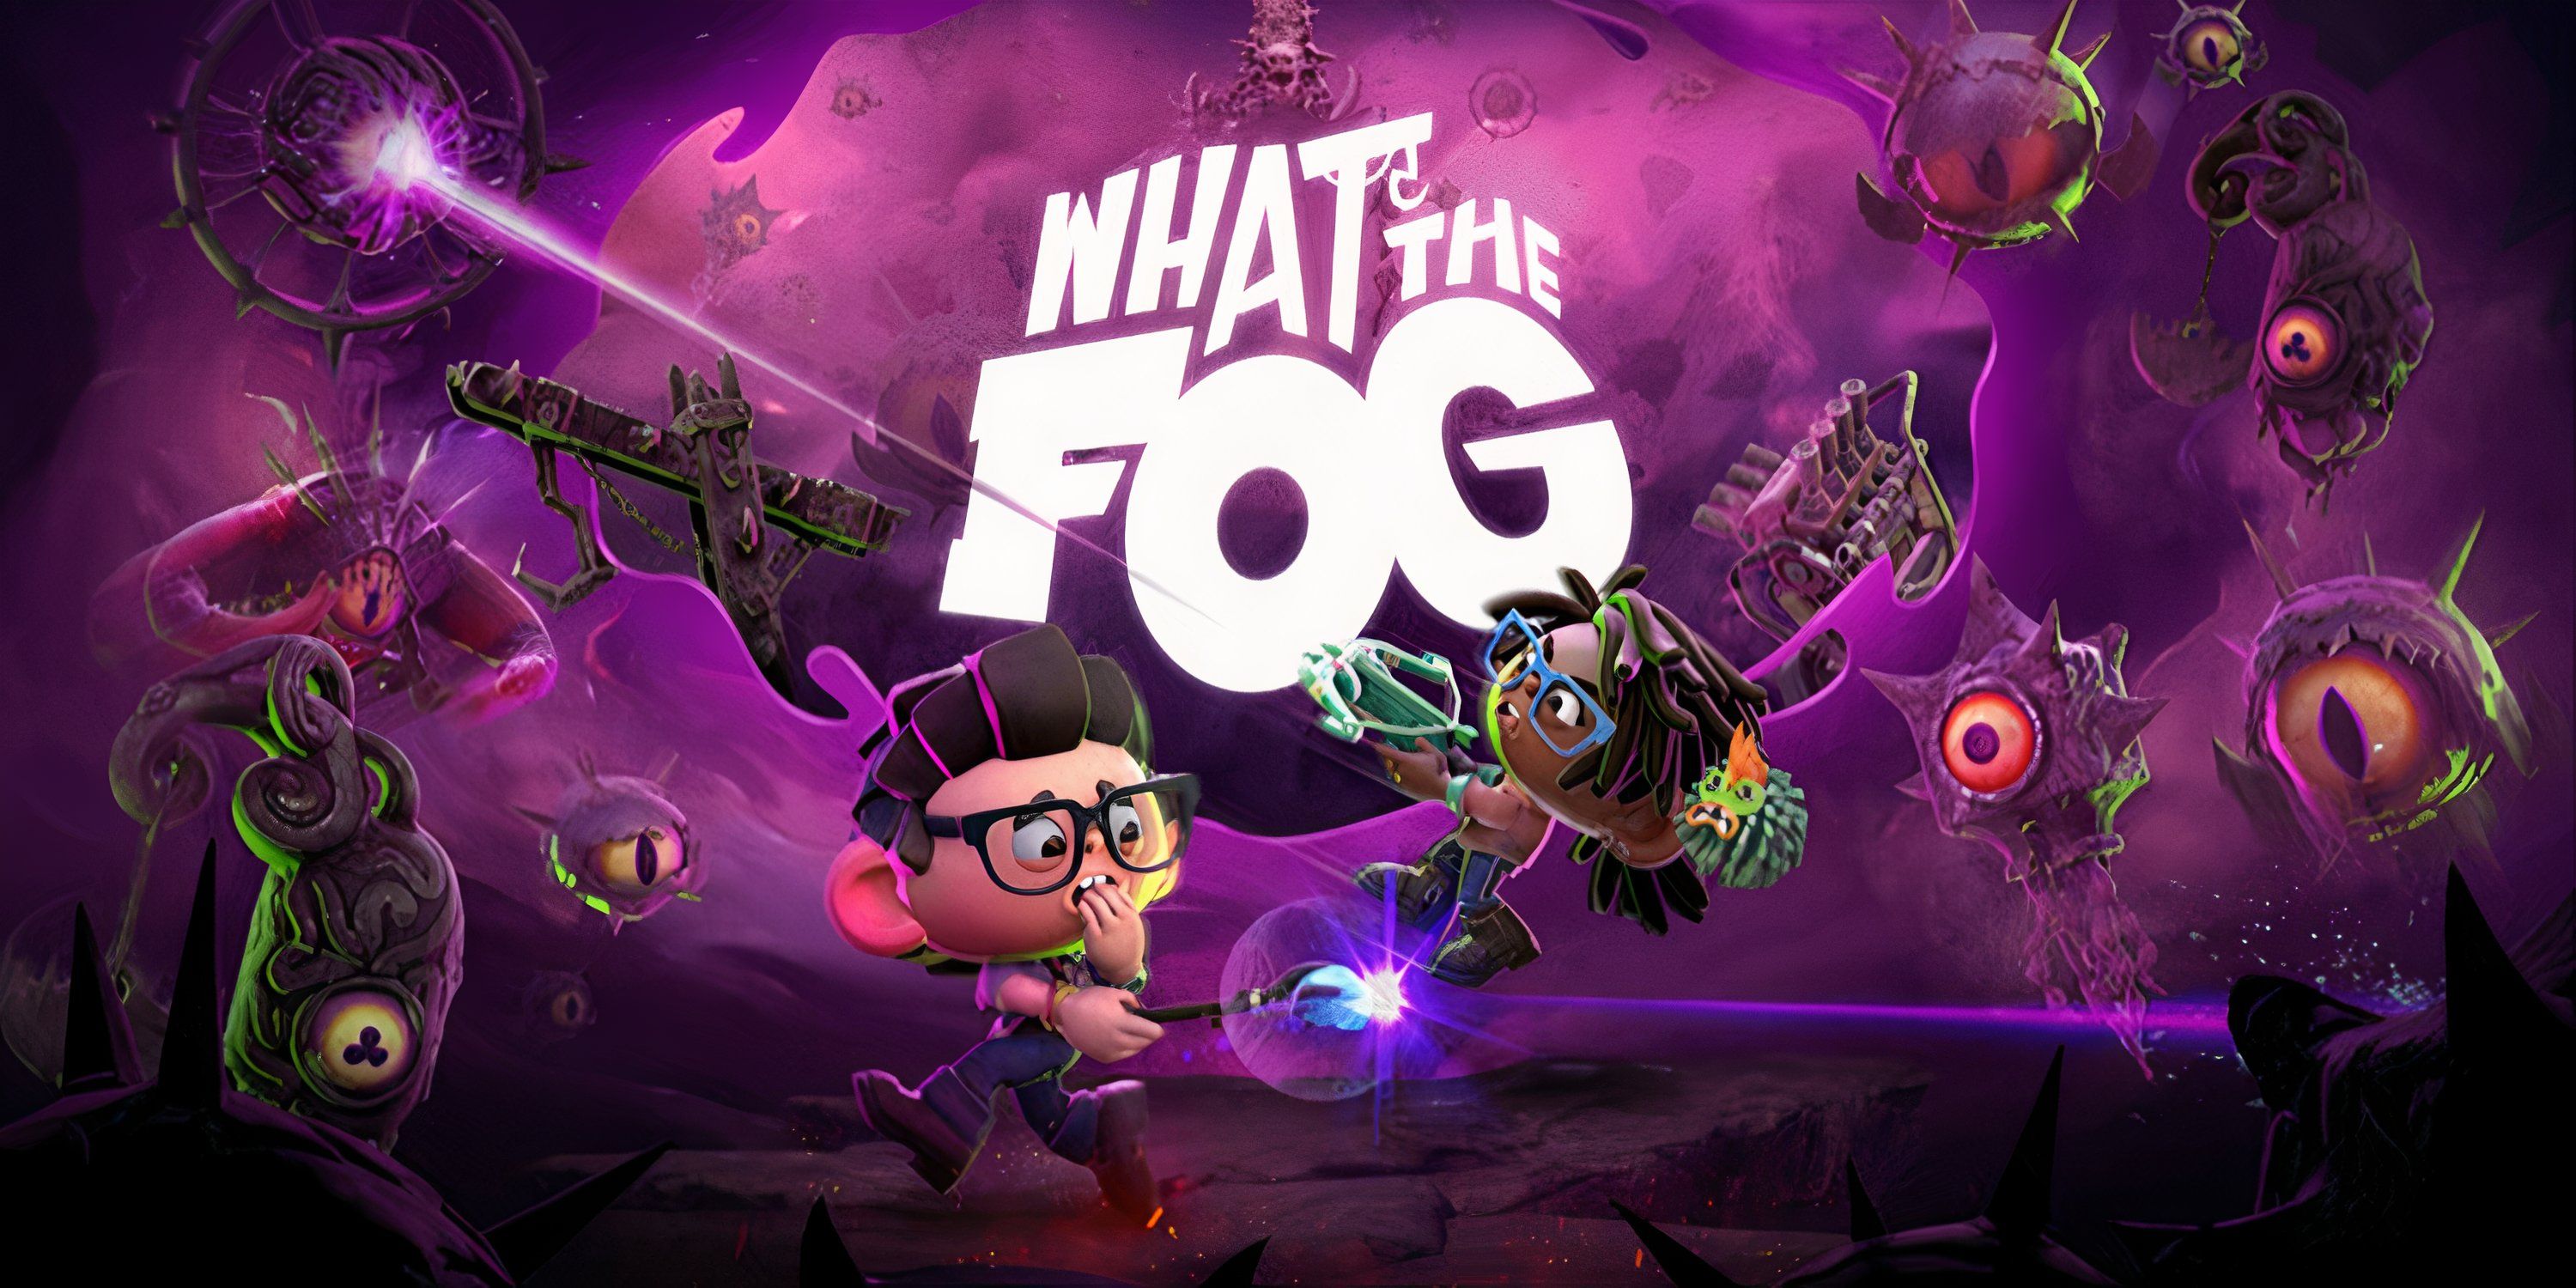 What The Fog - survivors battling monsters on purple background, dwight fairfield